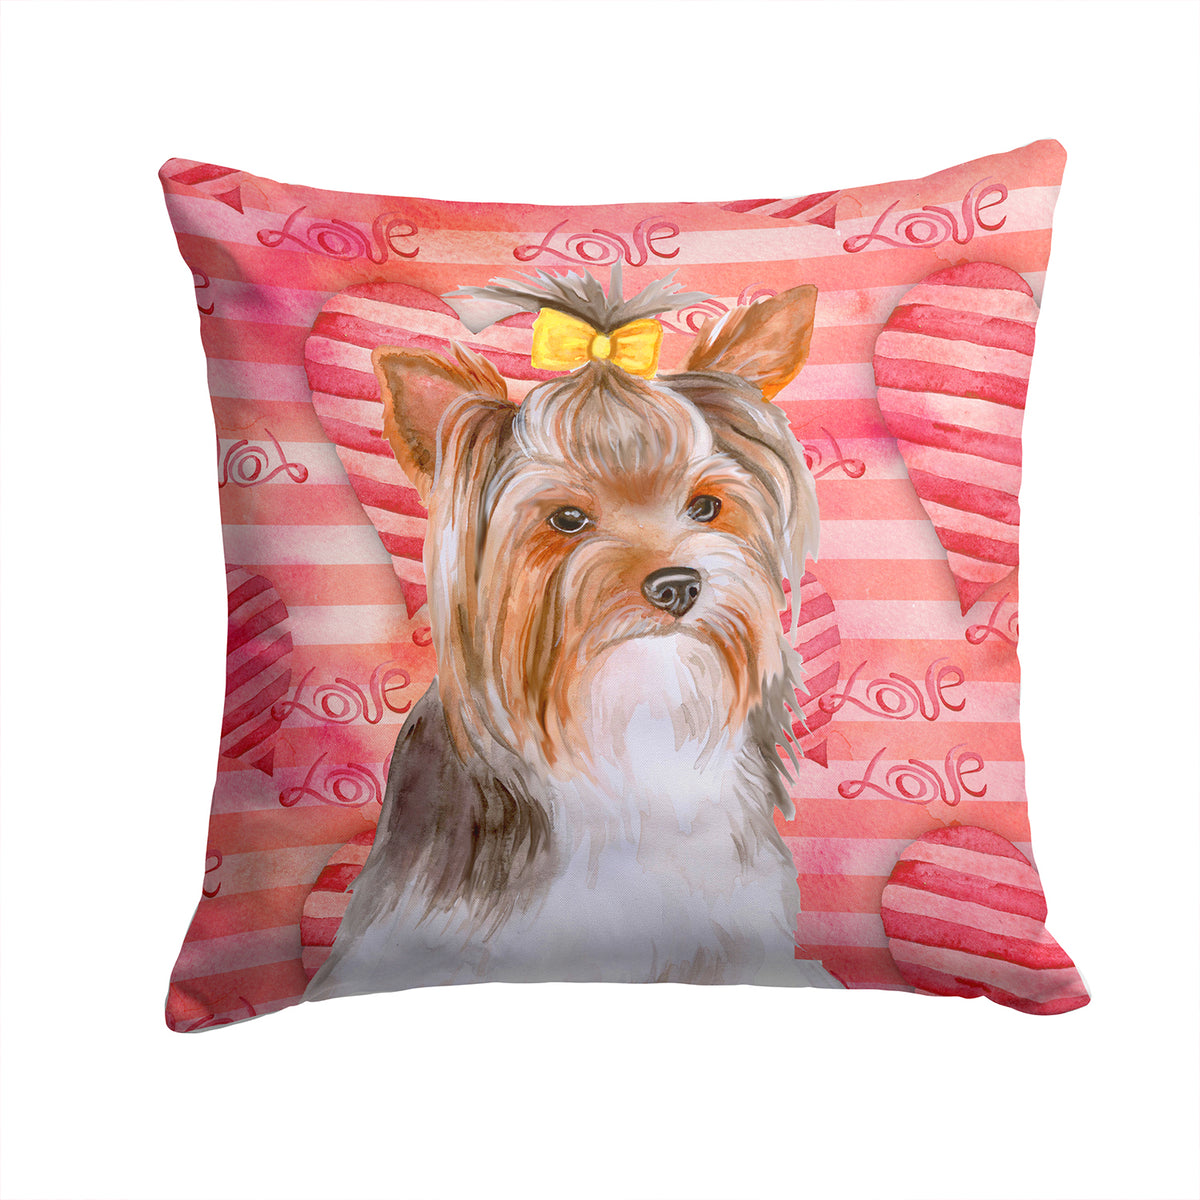 Yorkshire Terrier #2 Love Fabric Decorative Pillow BB9810PW1414 - the-store.com